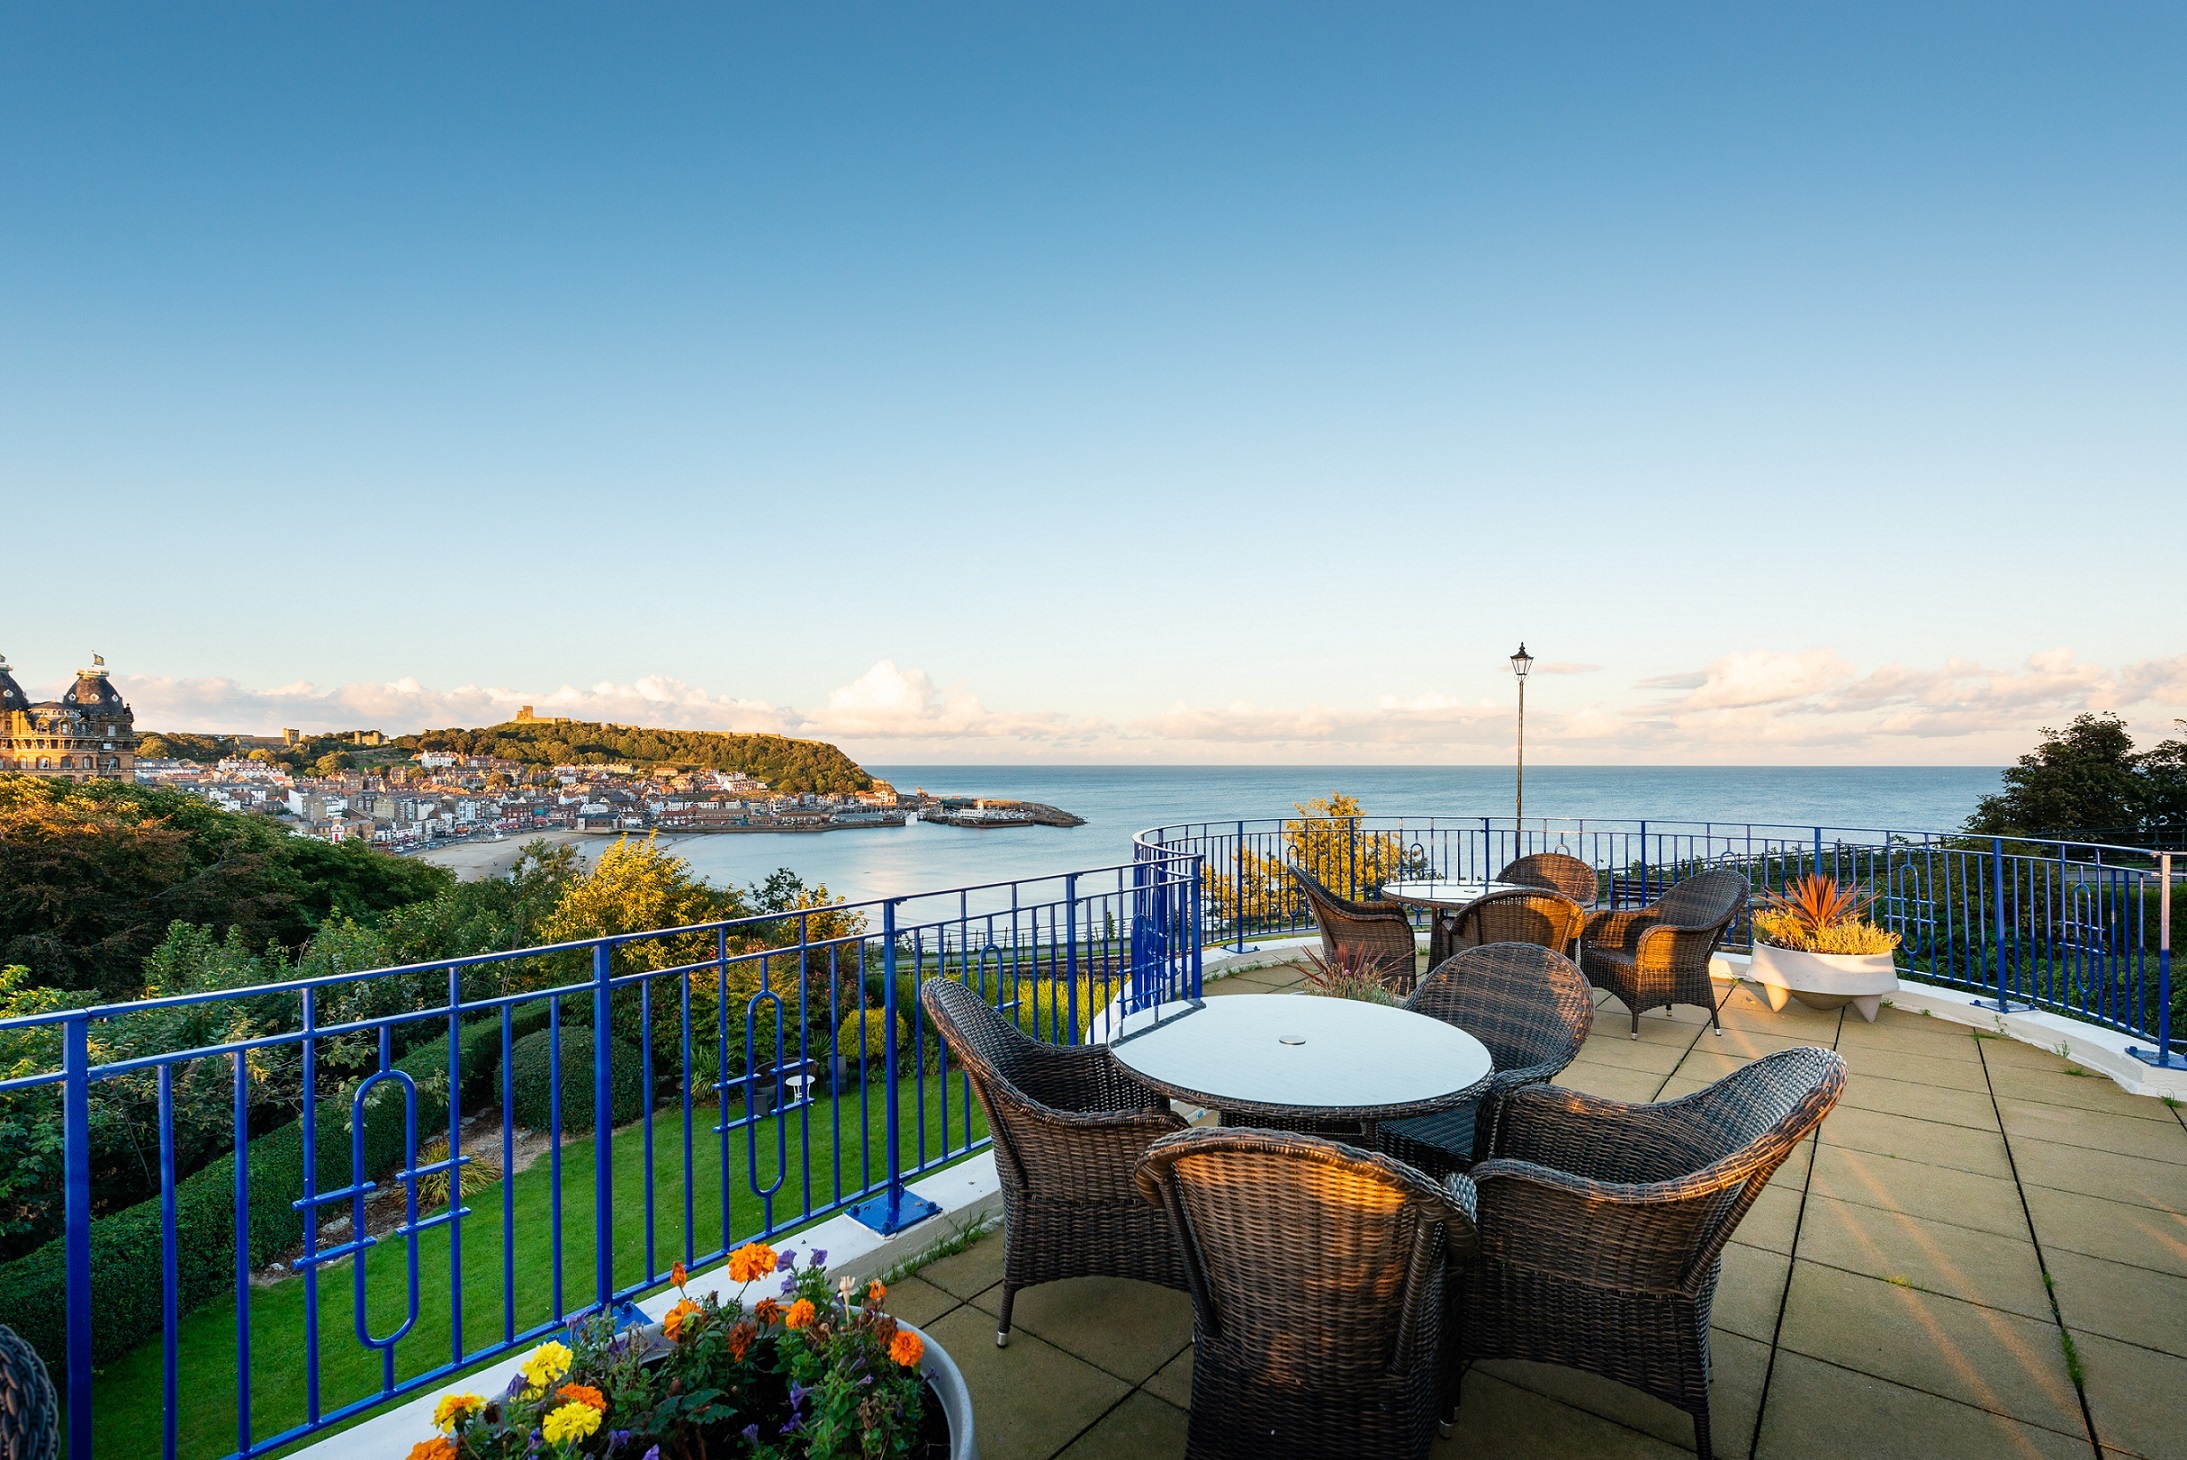 The terrace at The Esplanade hotel, Scarborough